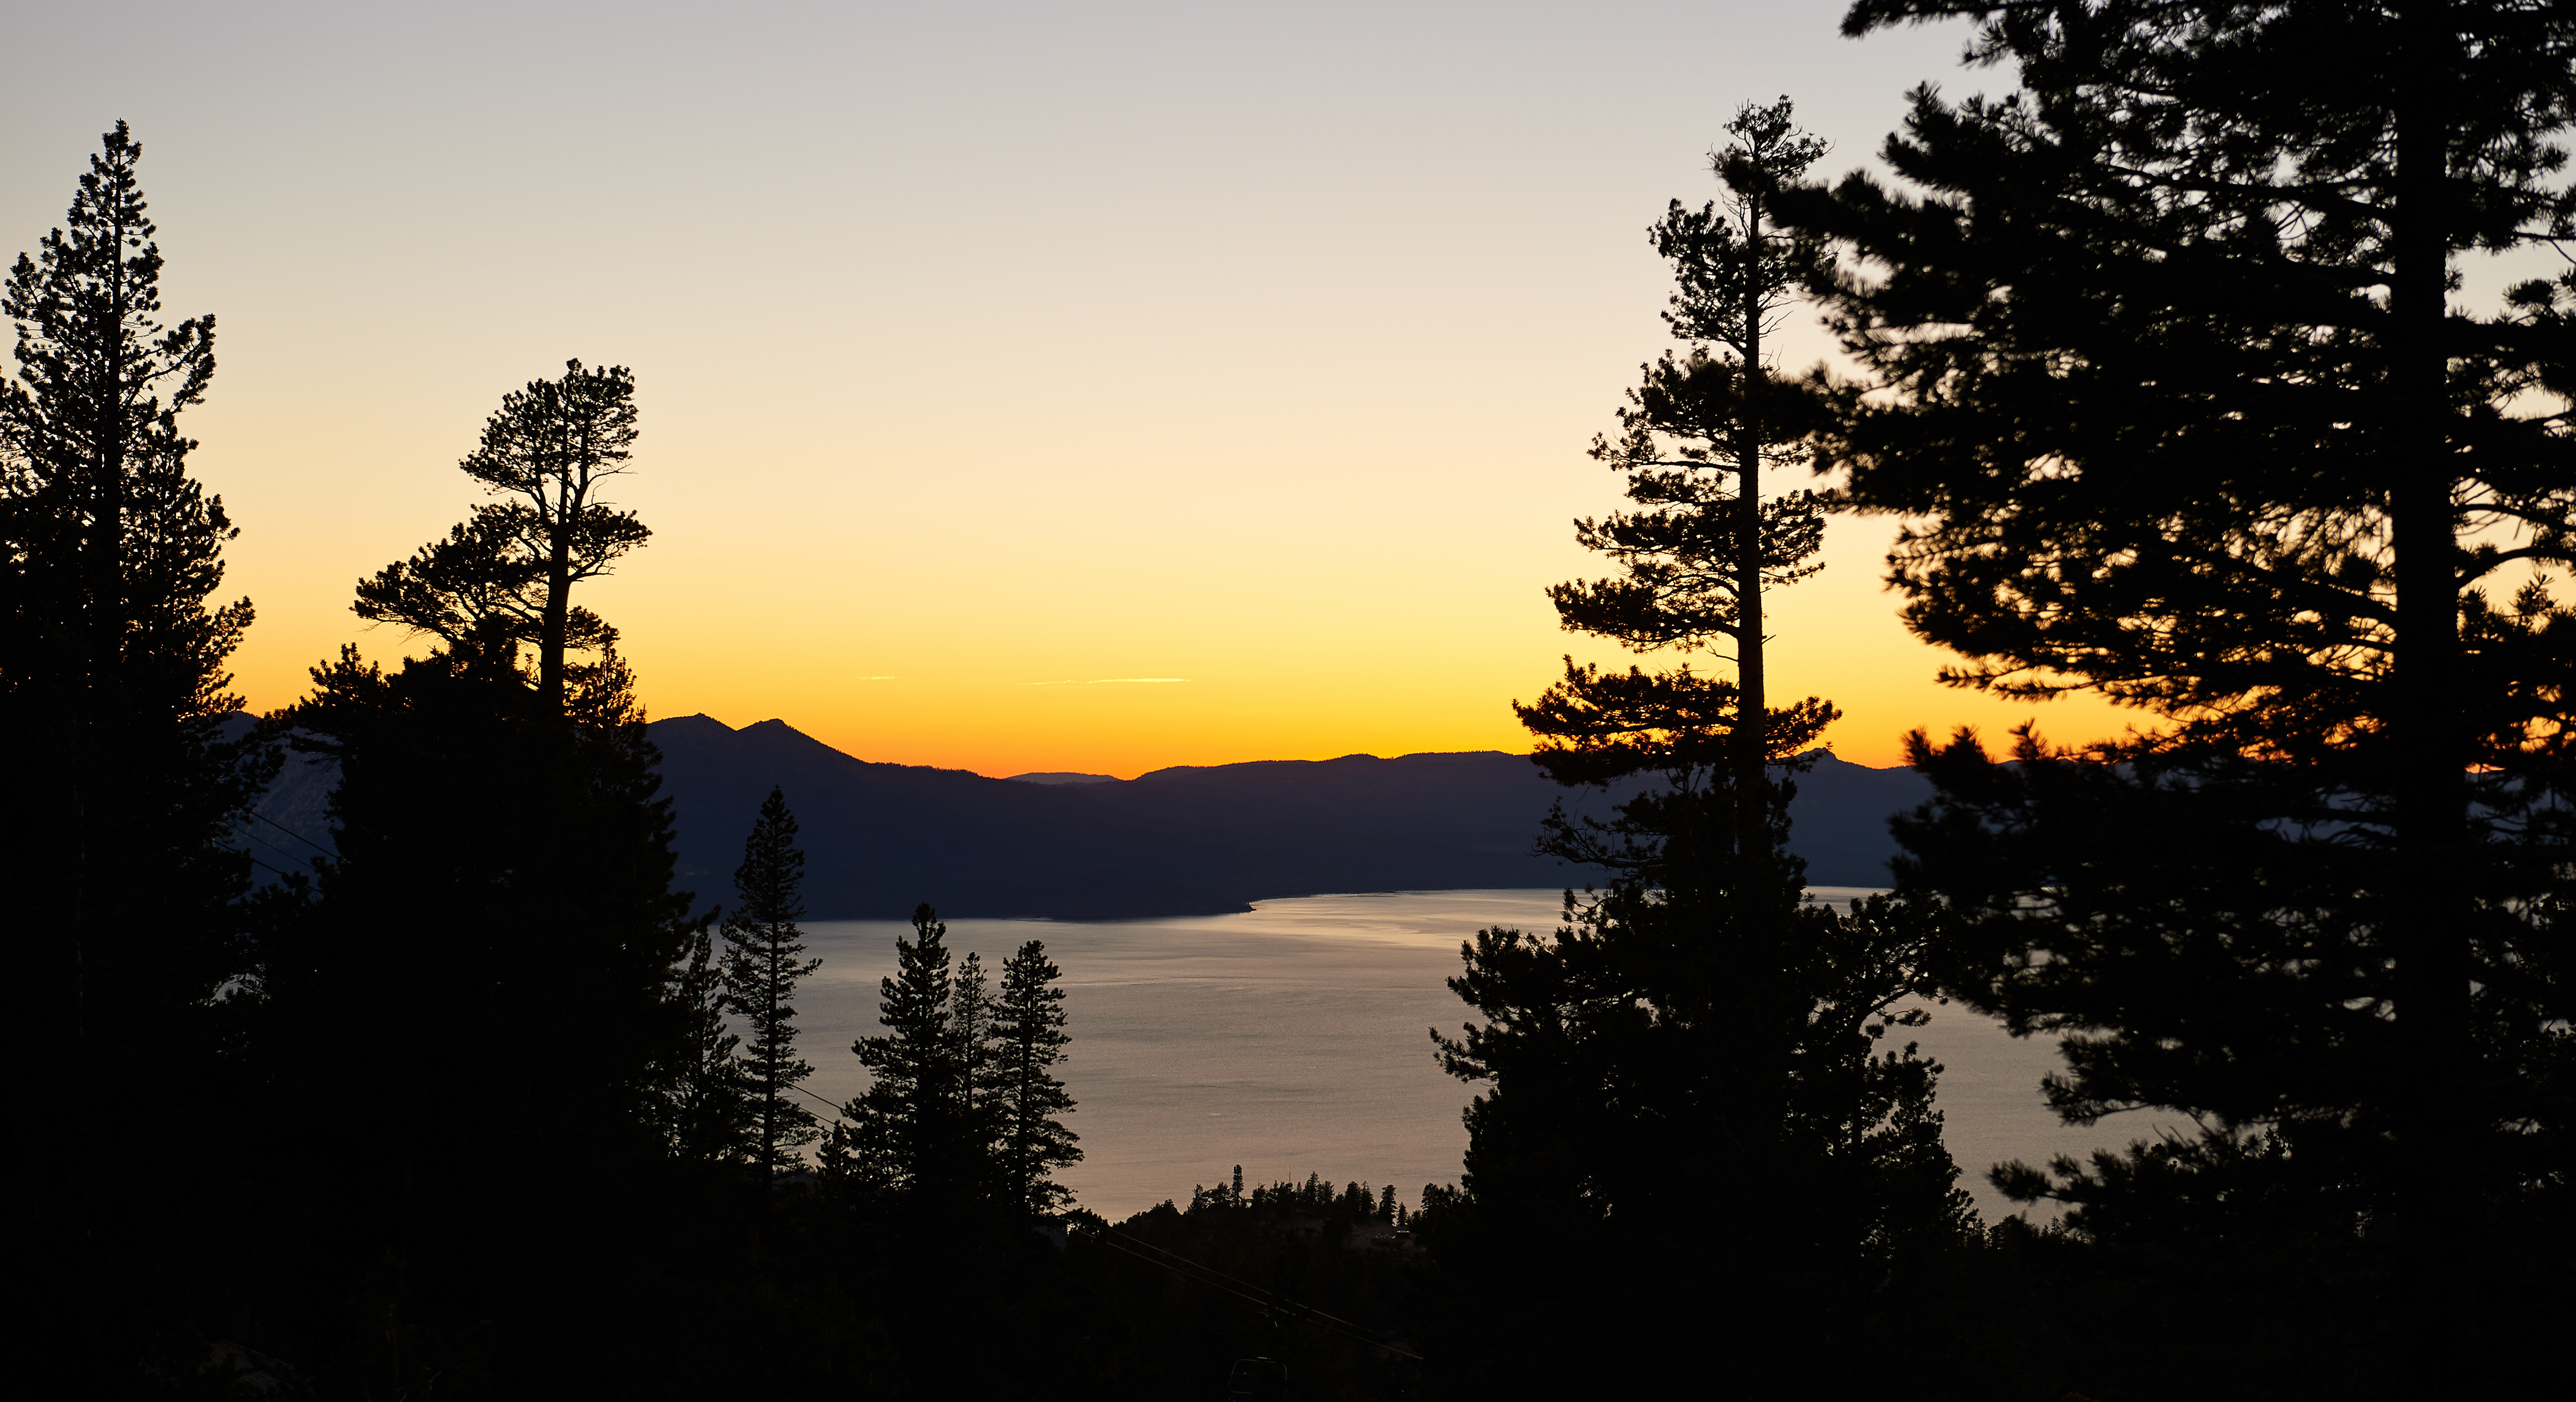 Sunset over Lake Tahoe in Heavenly, CA.